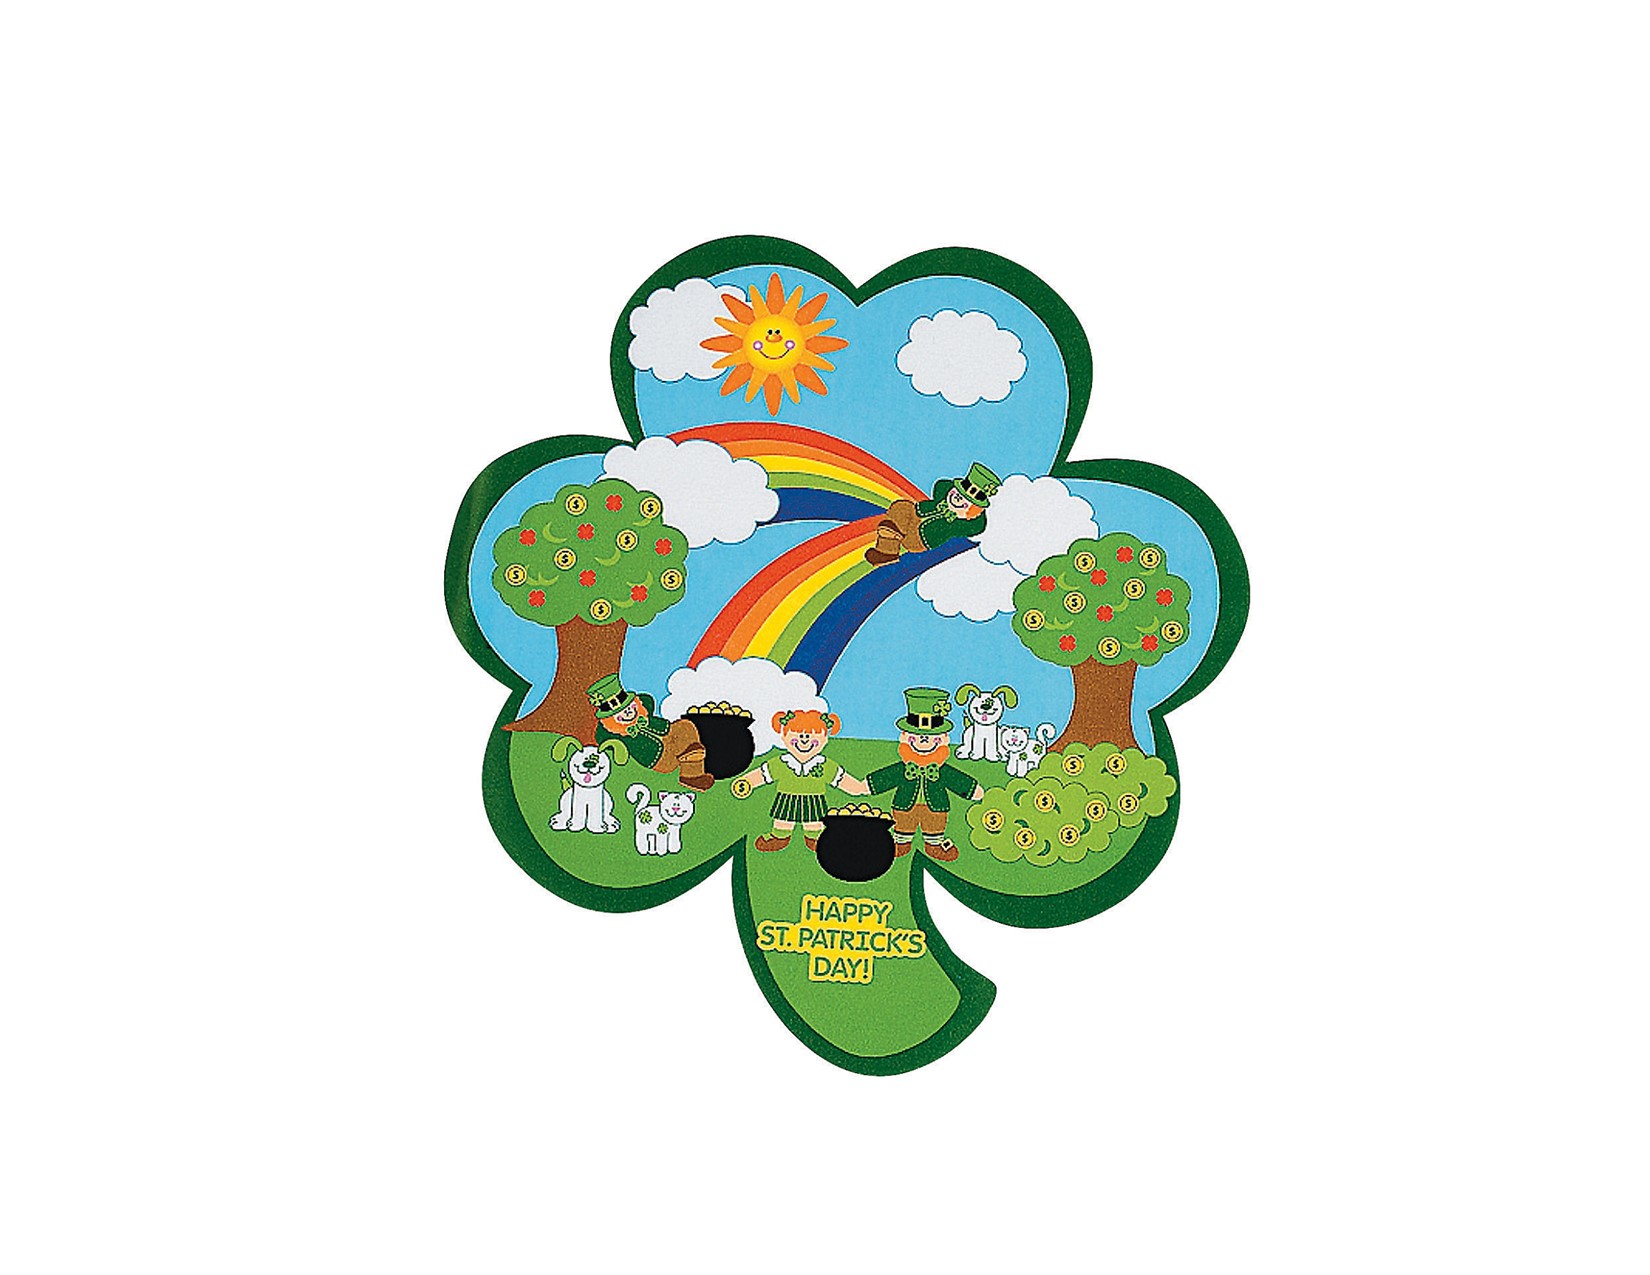 shamrock decorated with the sun, clouds, a rainbow, trees, leprechauns, pots of gold, dogs and cats